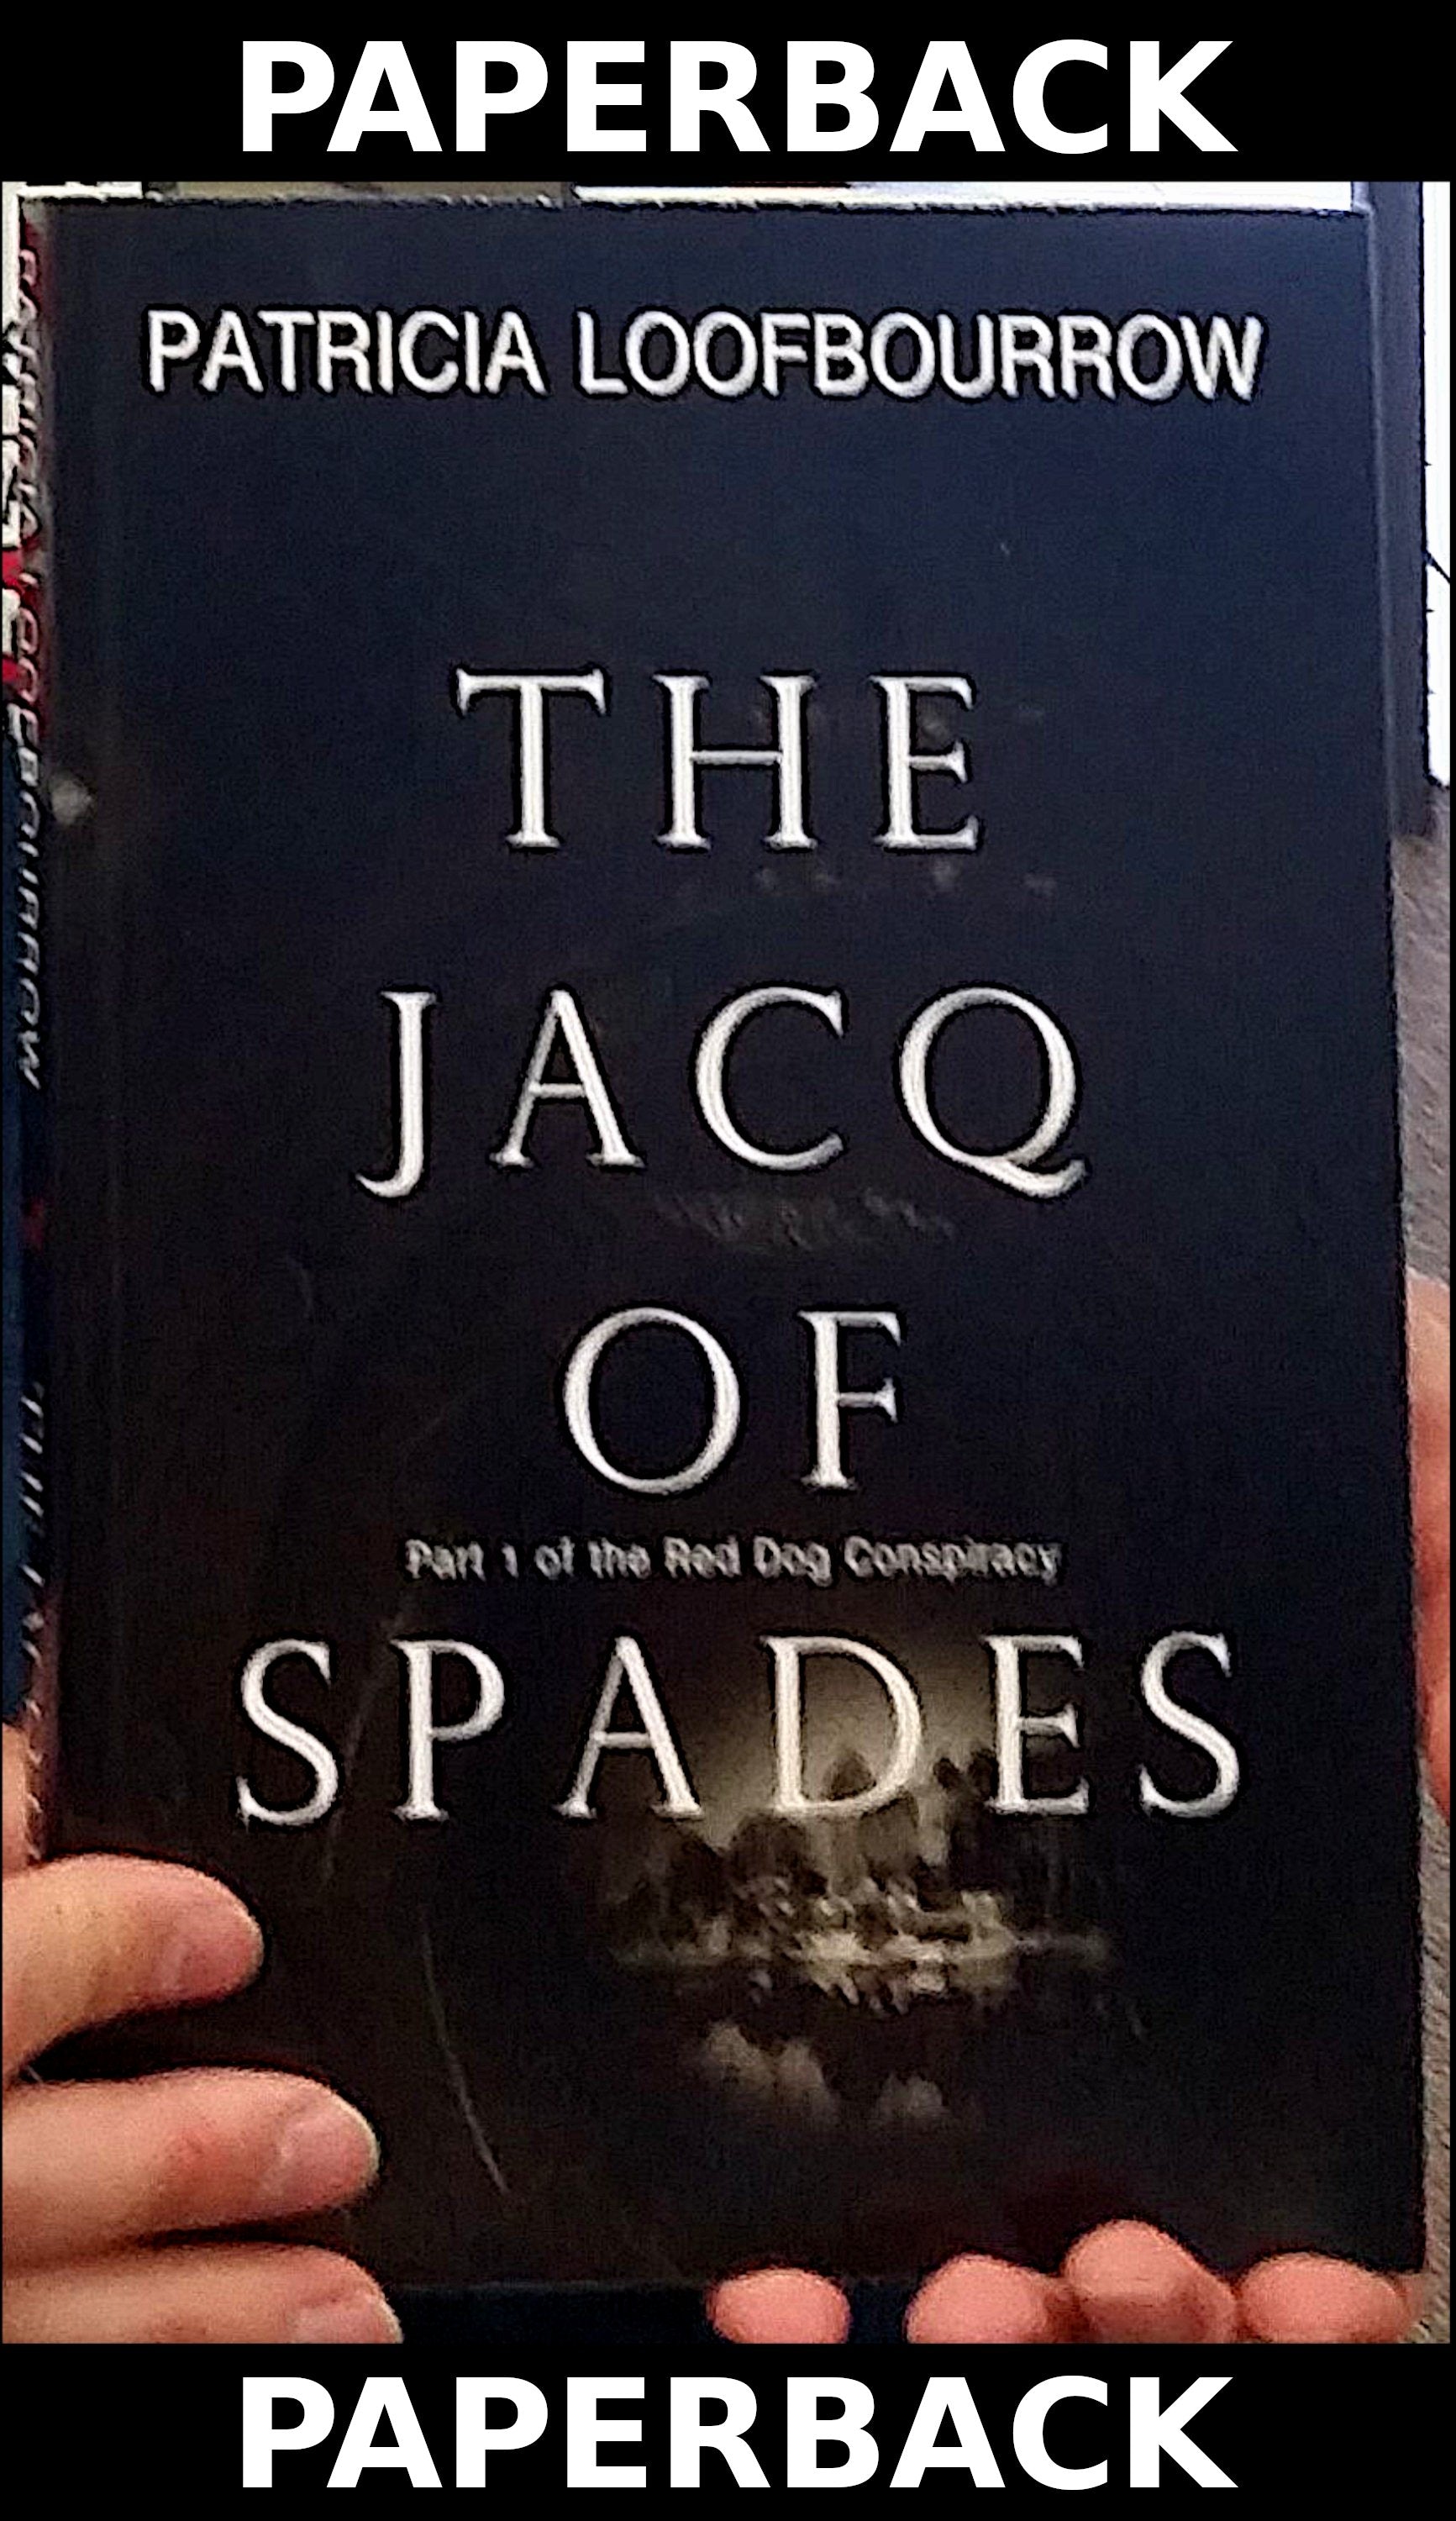 [Free copy] The Jacq of Spades Paperback - PatriciaLoofbourrow